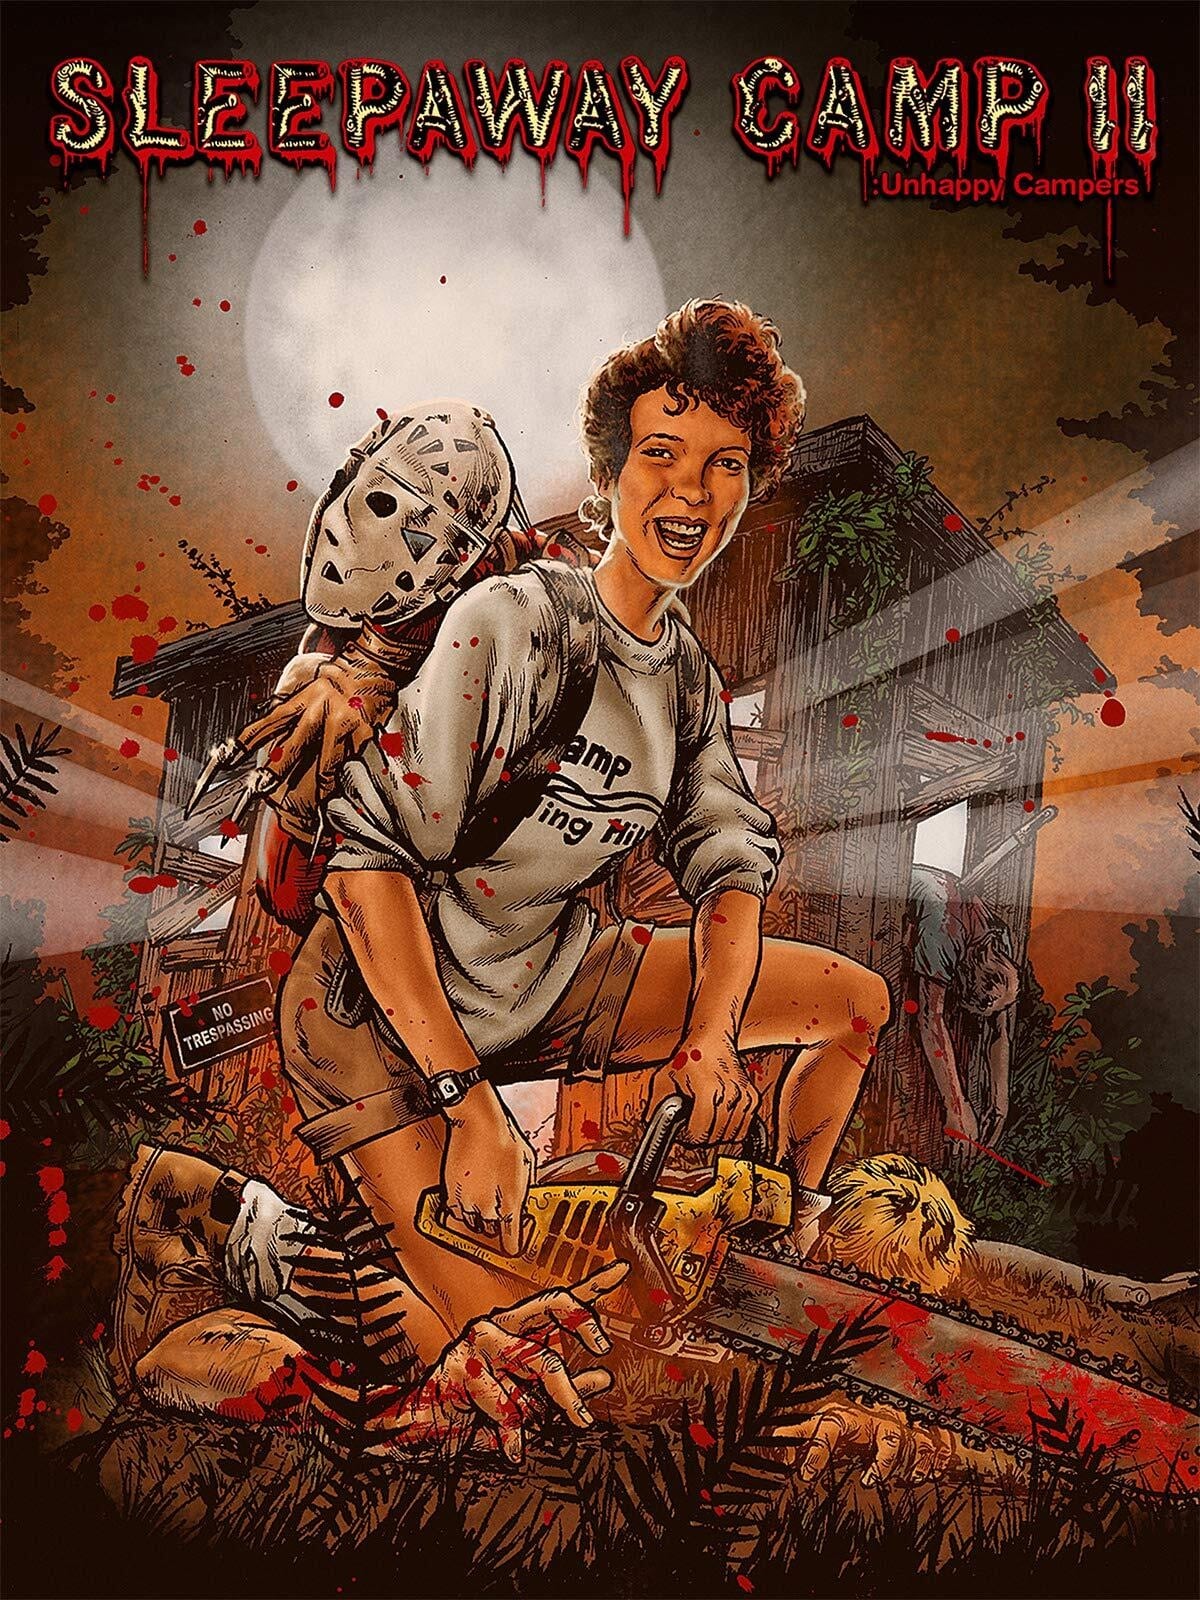 This Year's Camp's a Scream – Sleepaway Camp II Unhappy Campers Released in 1988